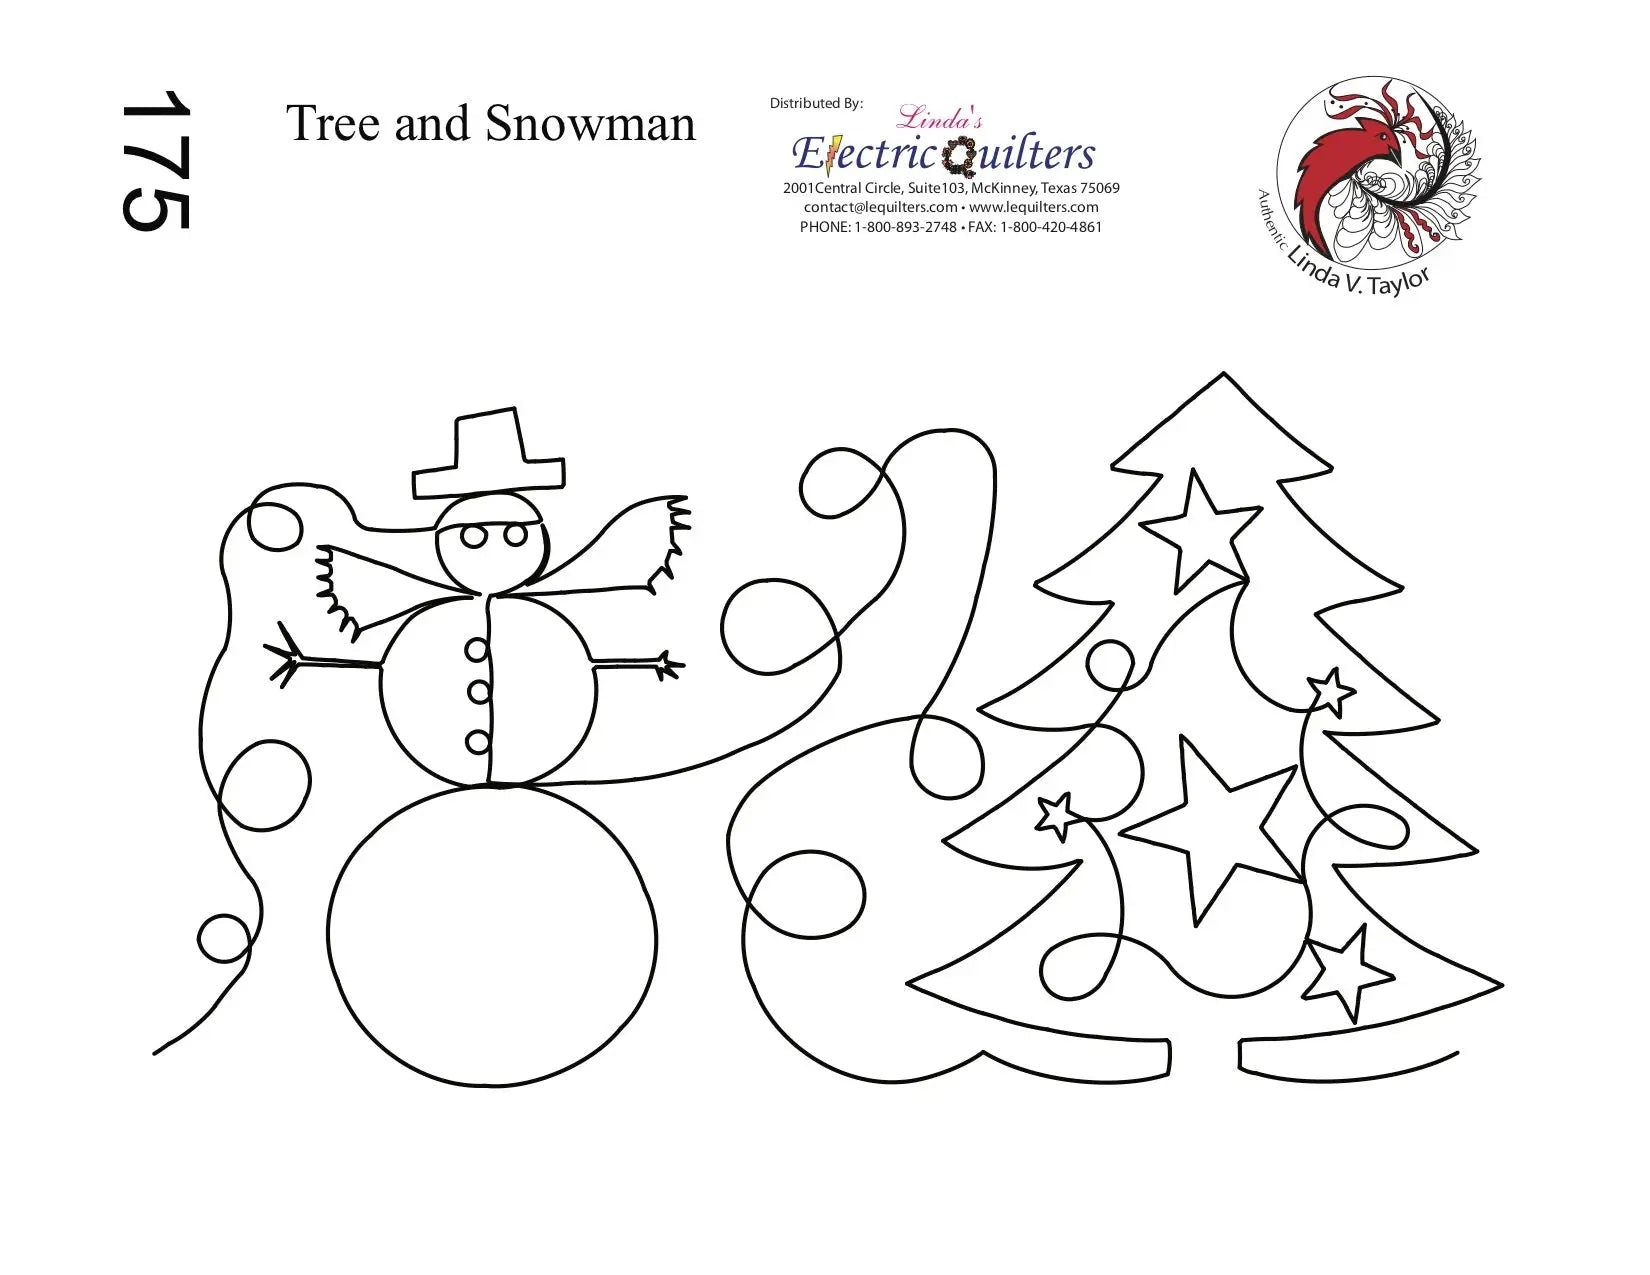 175 Trees And Snowman Pantograph by Linda V. Taylor - Linda's Electric Quilters